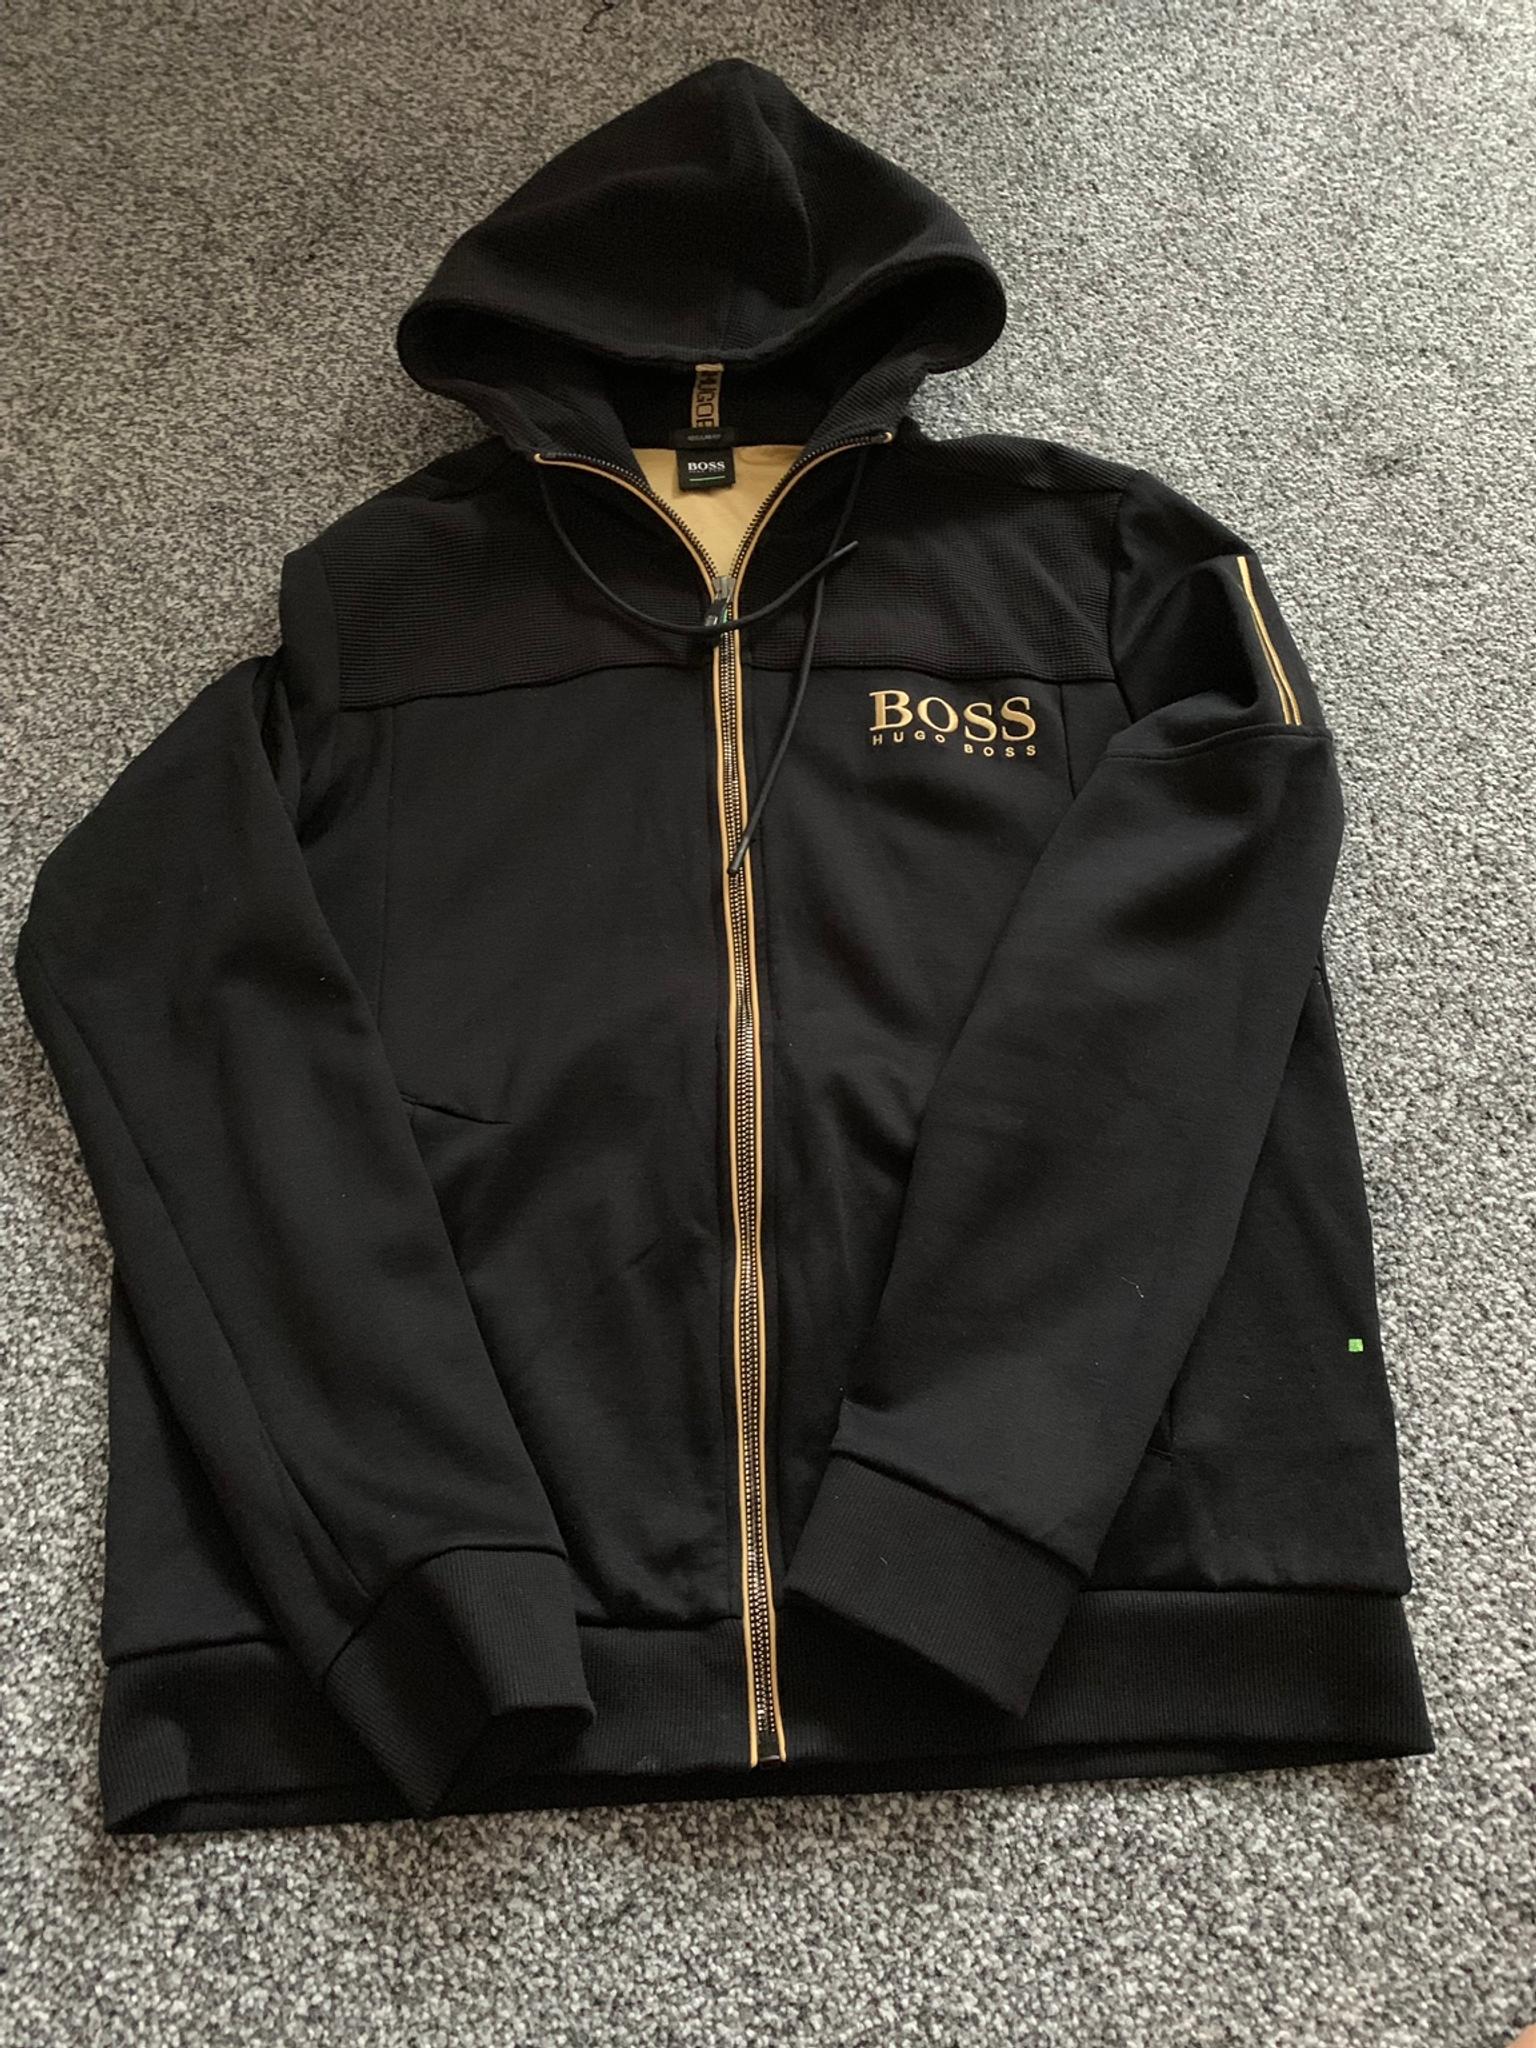 hugo boss tracksuit black and grey Cheaper Than Retail Price\u003e Buy Clothing,  Accessories and lifestyle products for women \u0026 men -